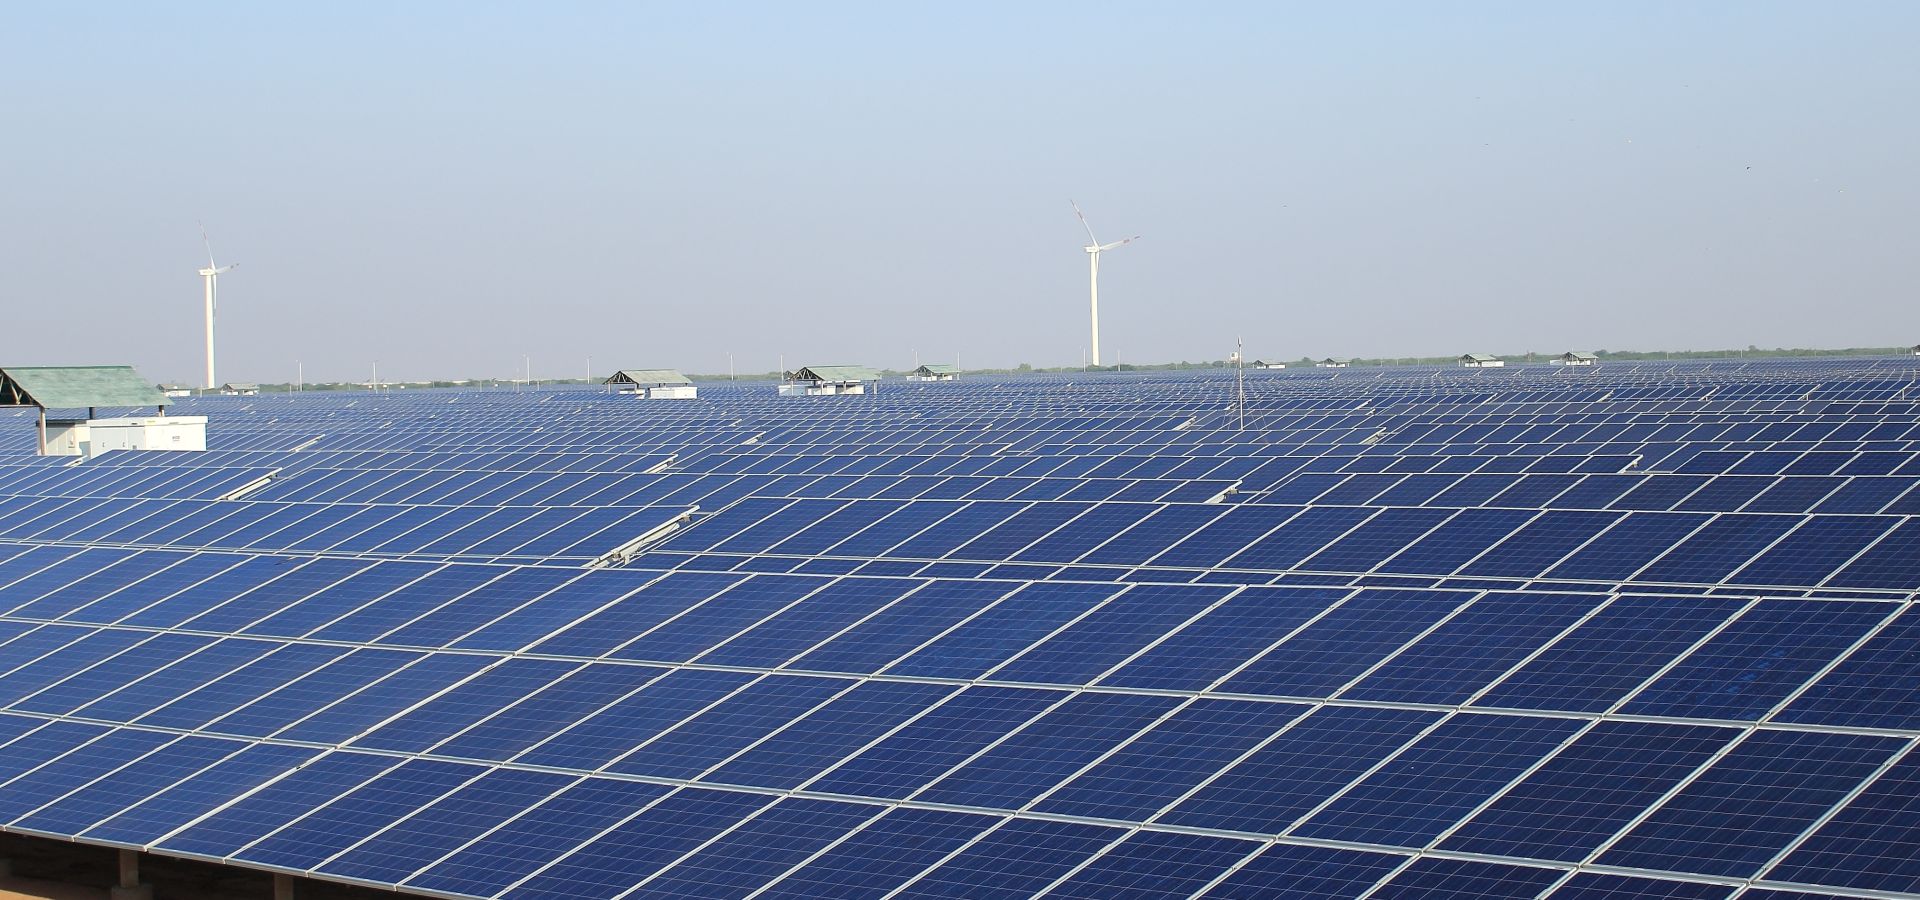 view of a field of solar panels with windmills interspersed